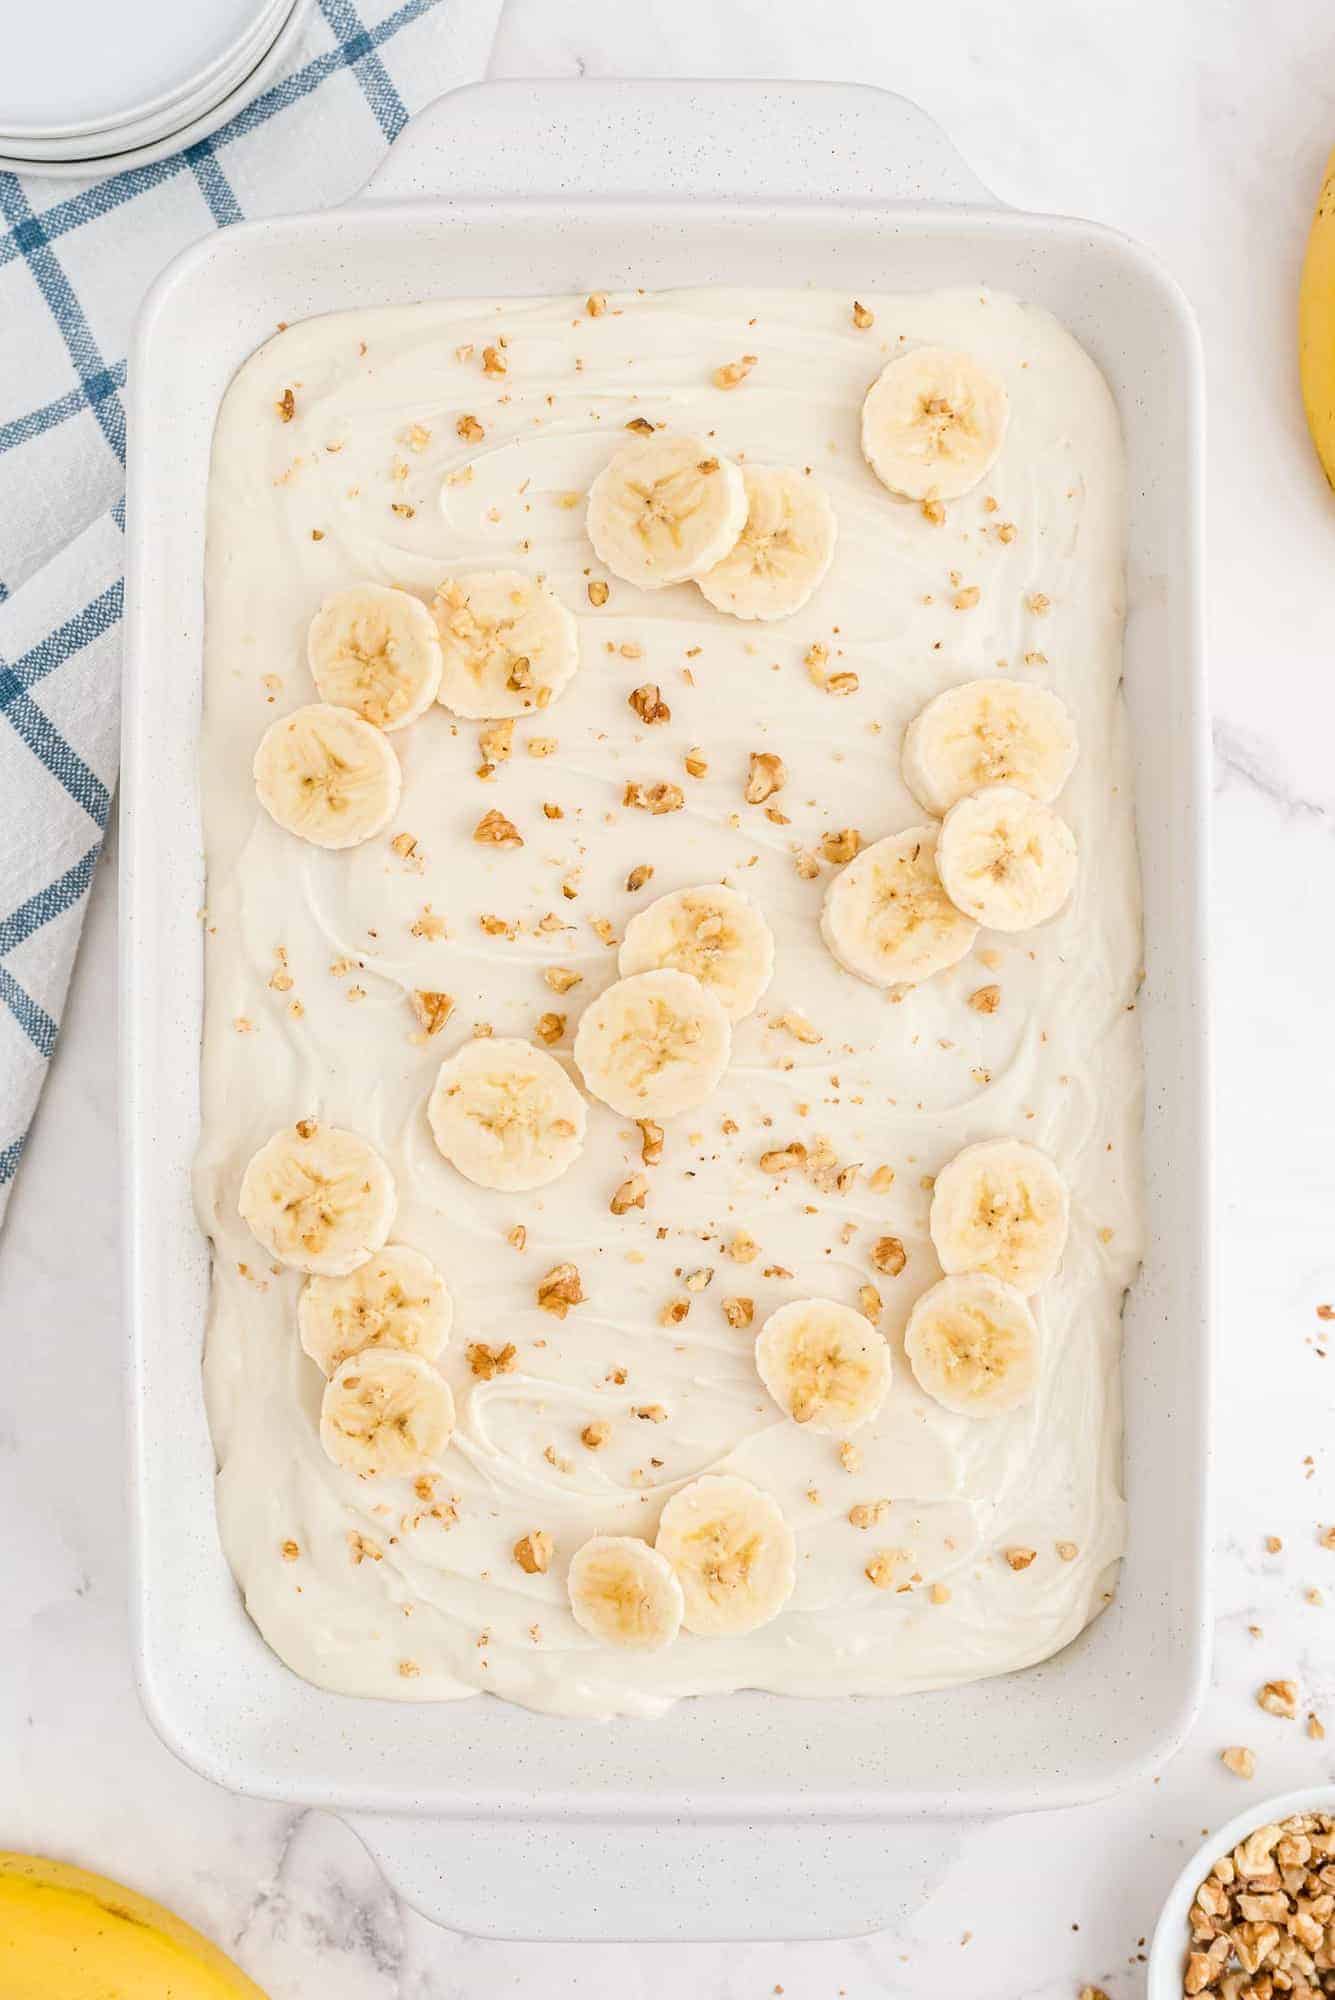 Overhead view of a cake topped with cream cheese frosting, sliced bananas, and chopped walnuts.